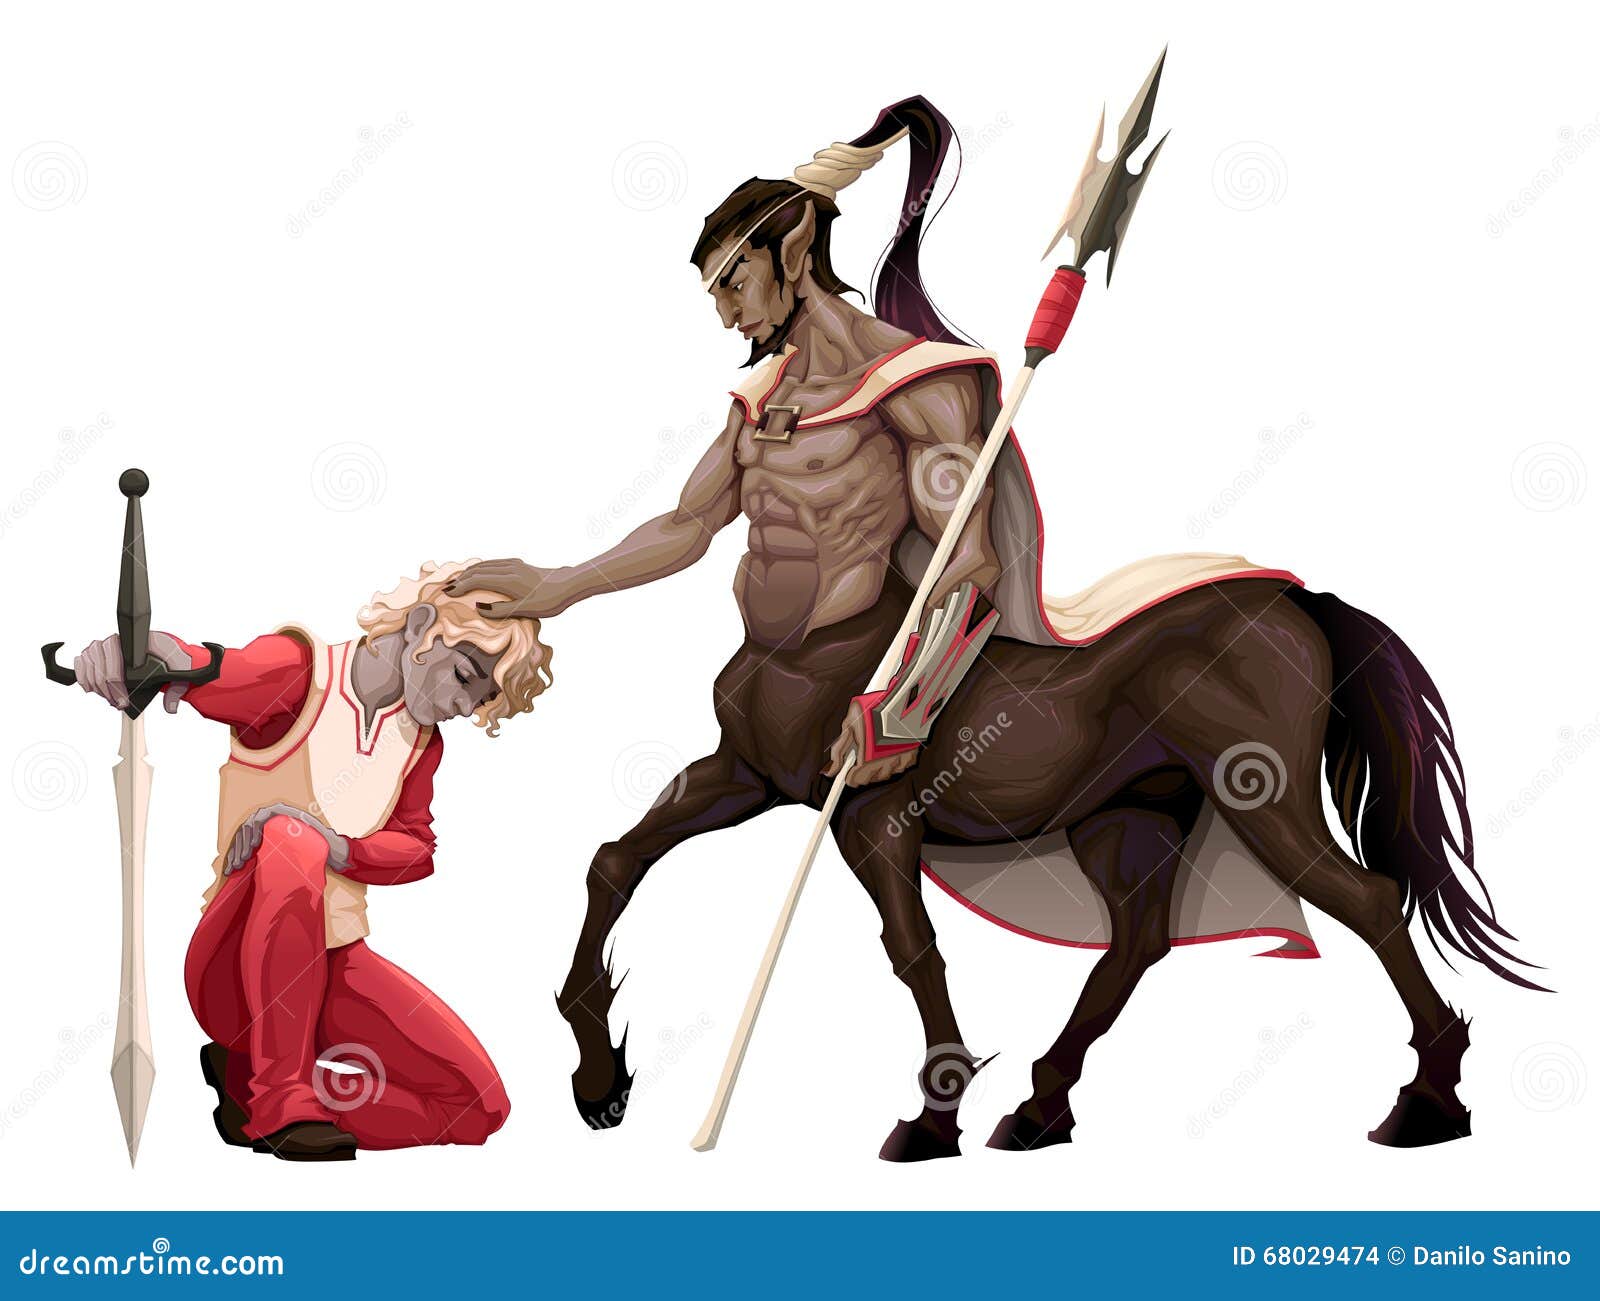 humility. the prince with the centaur.